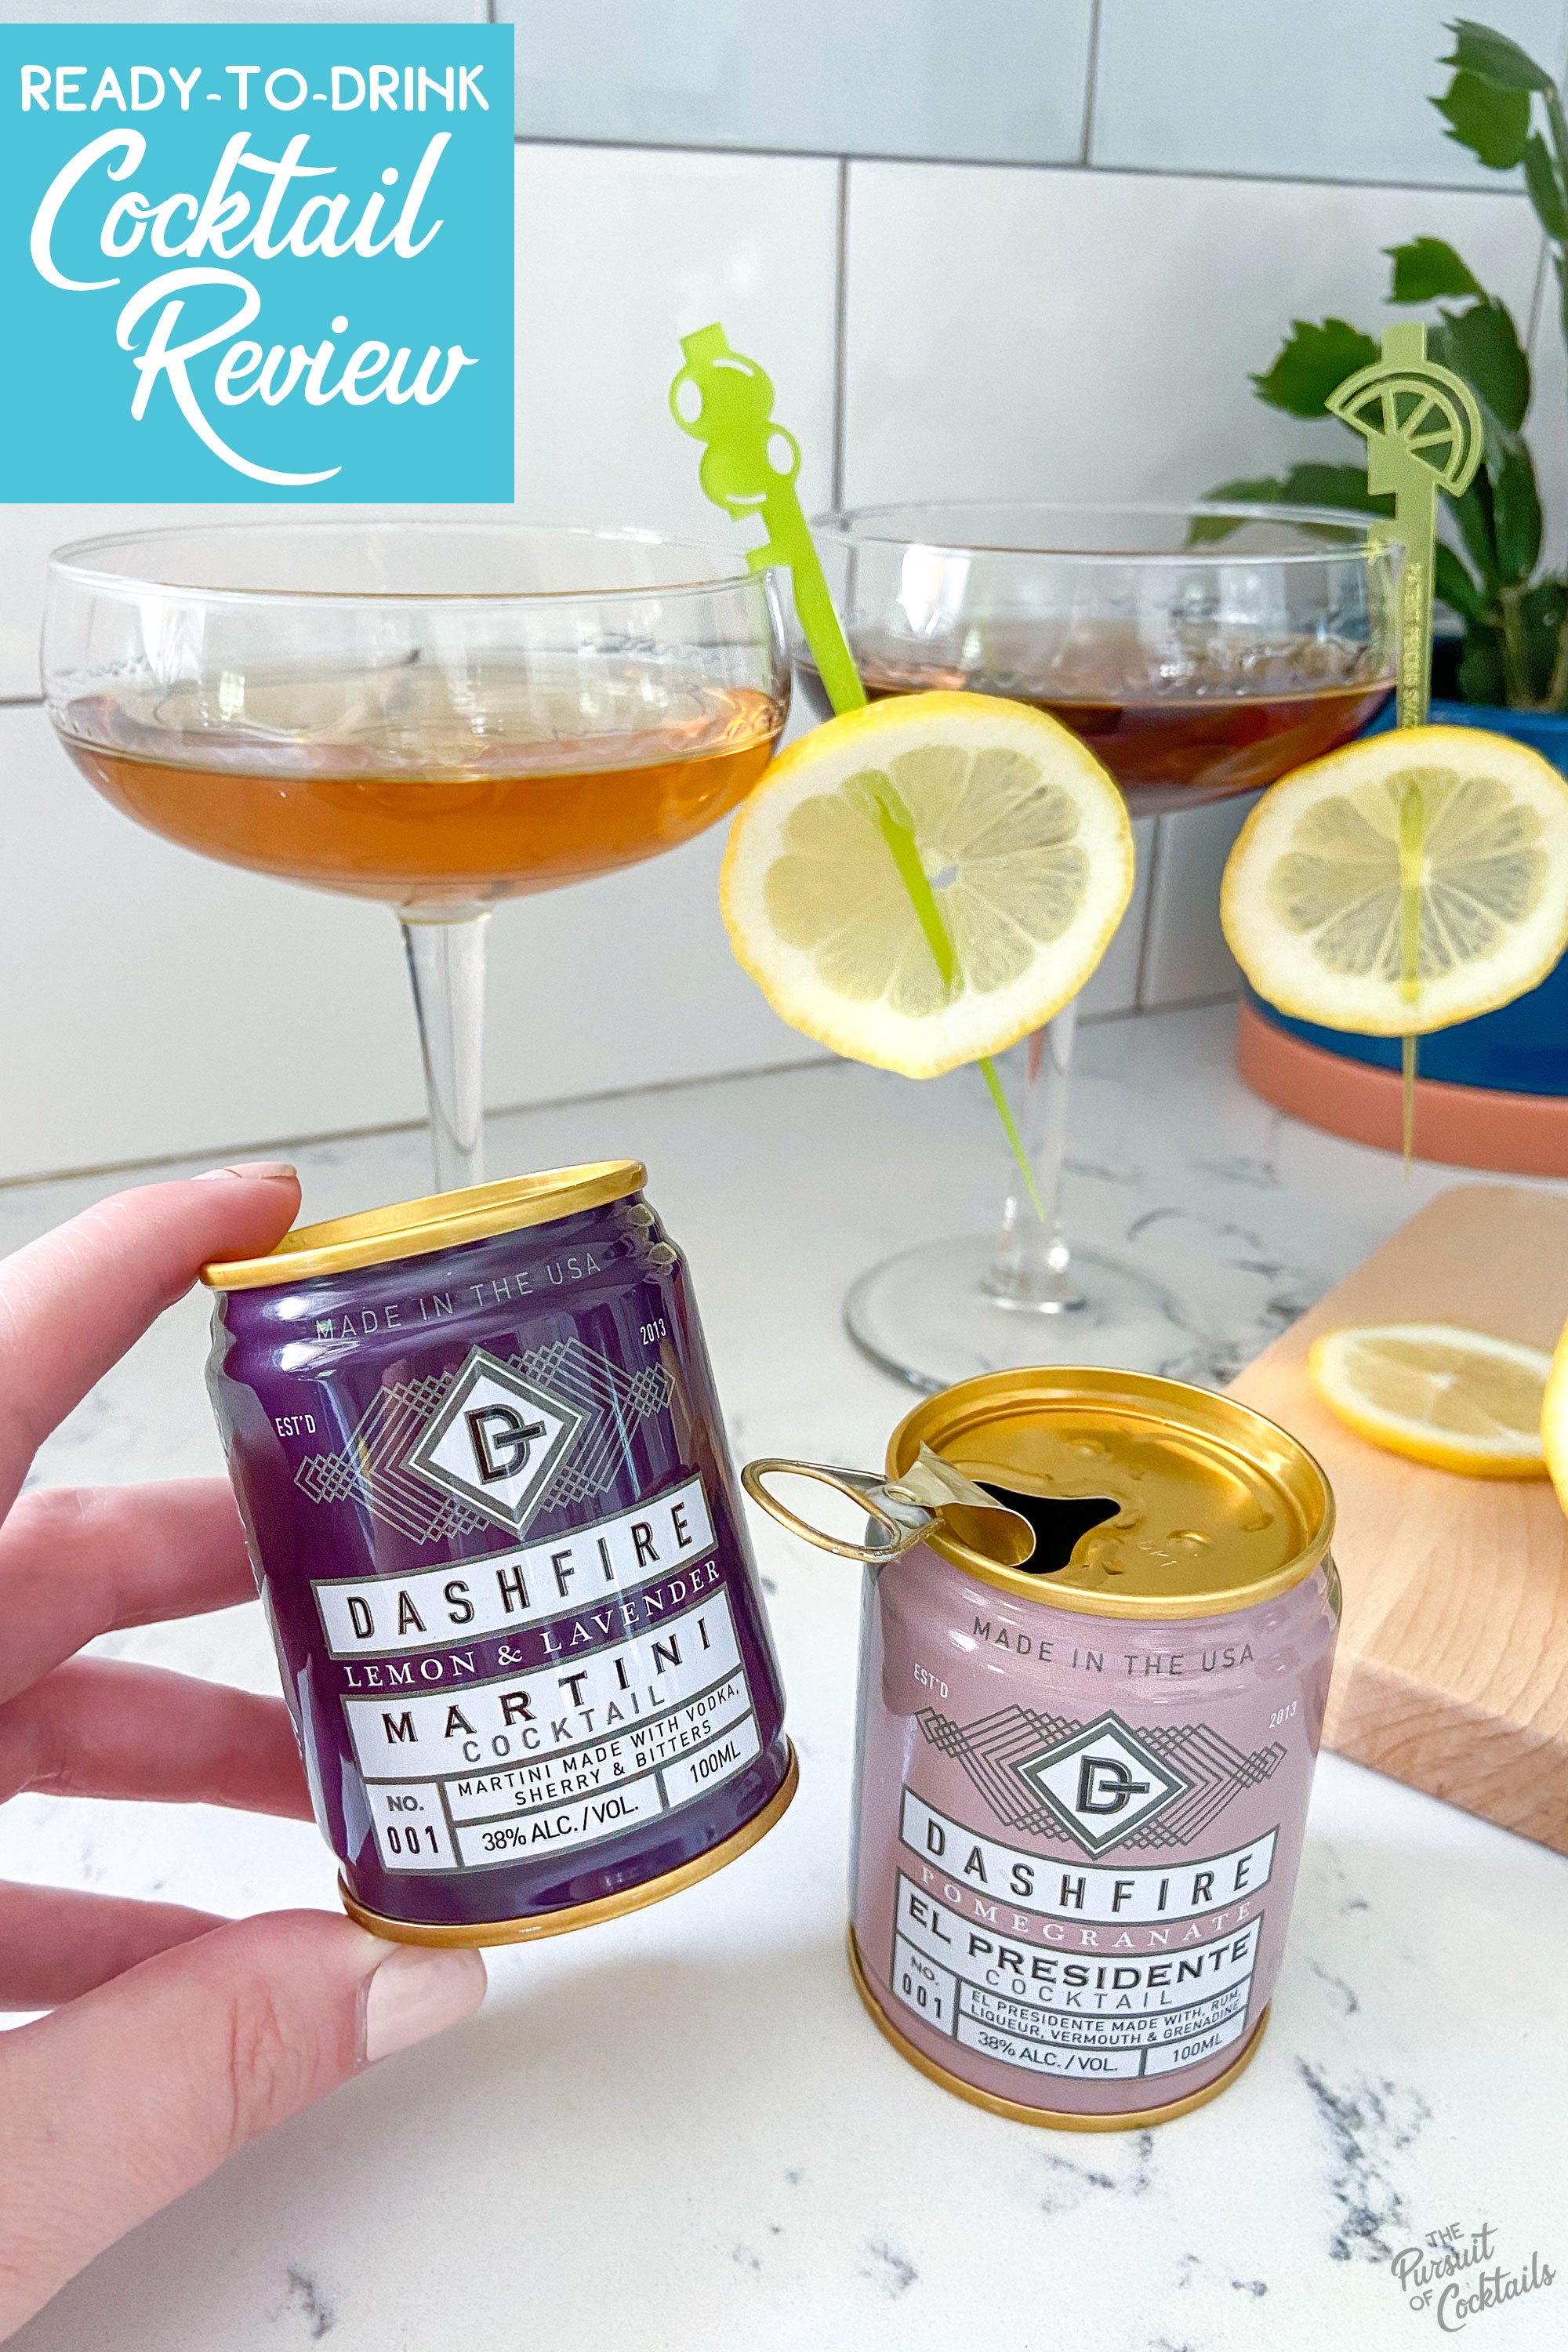 Canned cocktail review of Dashfire Lemon and Lavender Martini, and Pomegranate El Presidente 